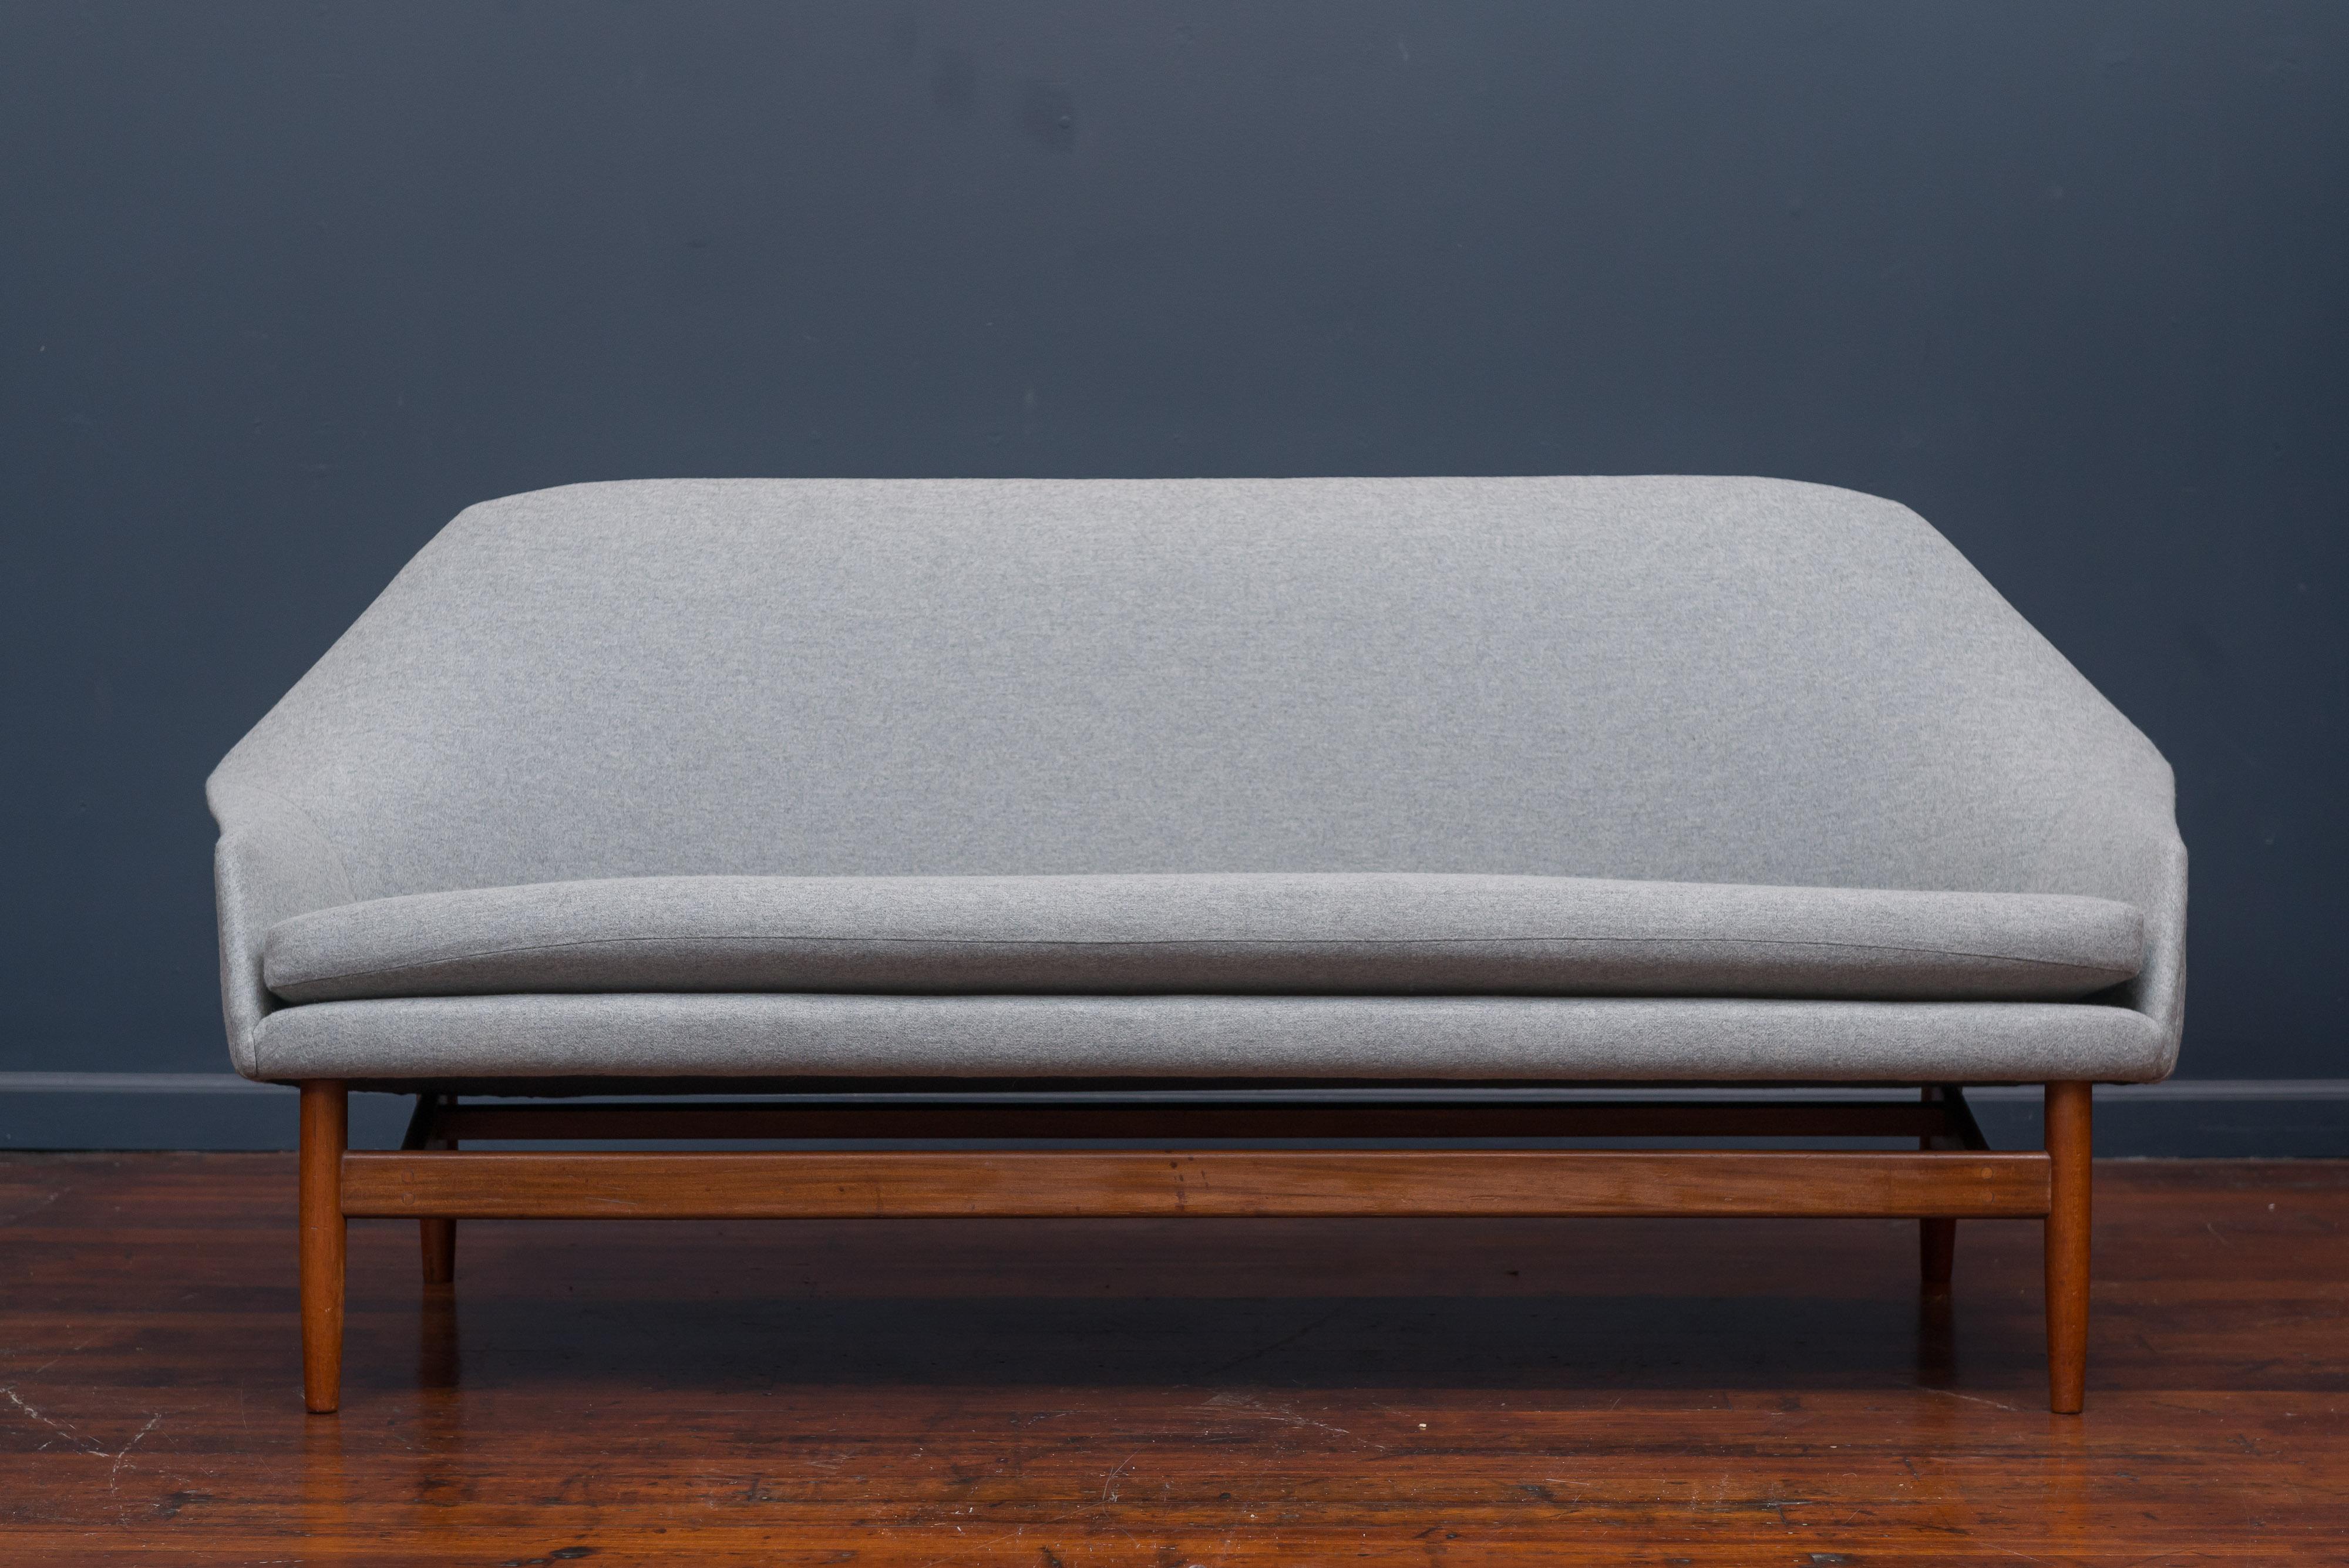 Ib Kofod Larsen design settee or small sofa for Carlo Garhn, Denmark, 1957. Newly upholstered and refinished.